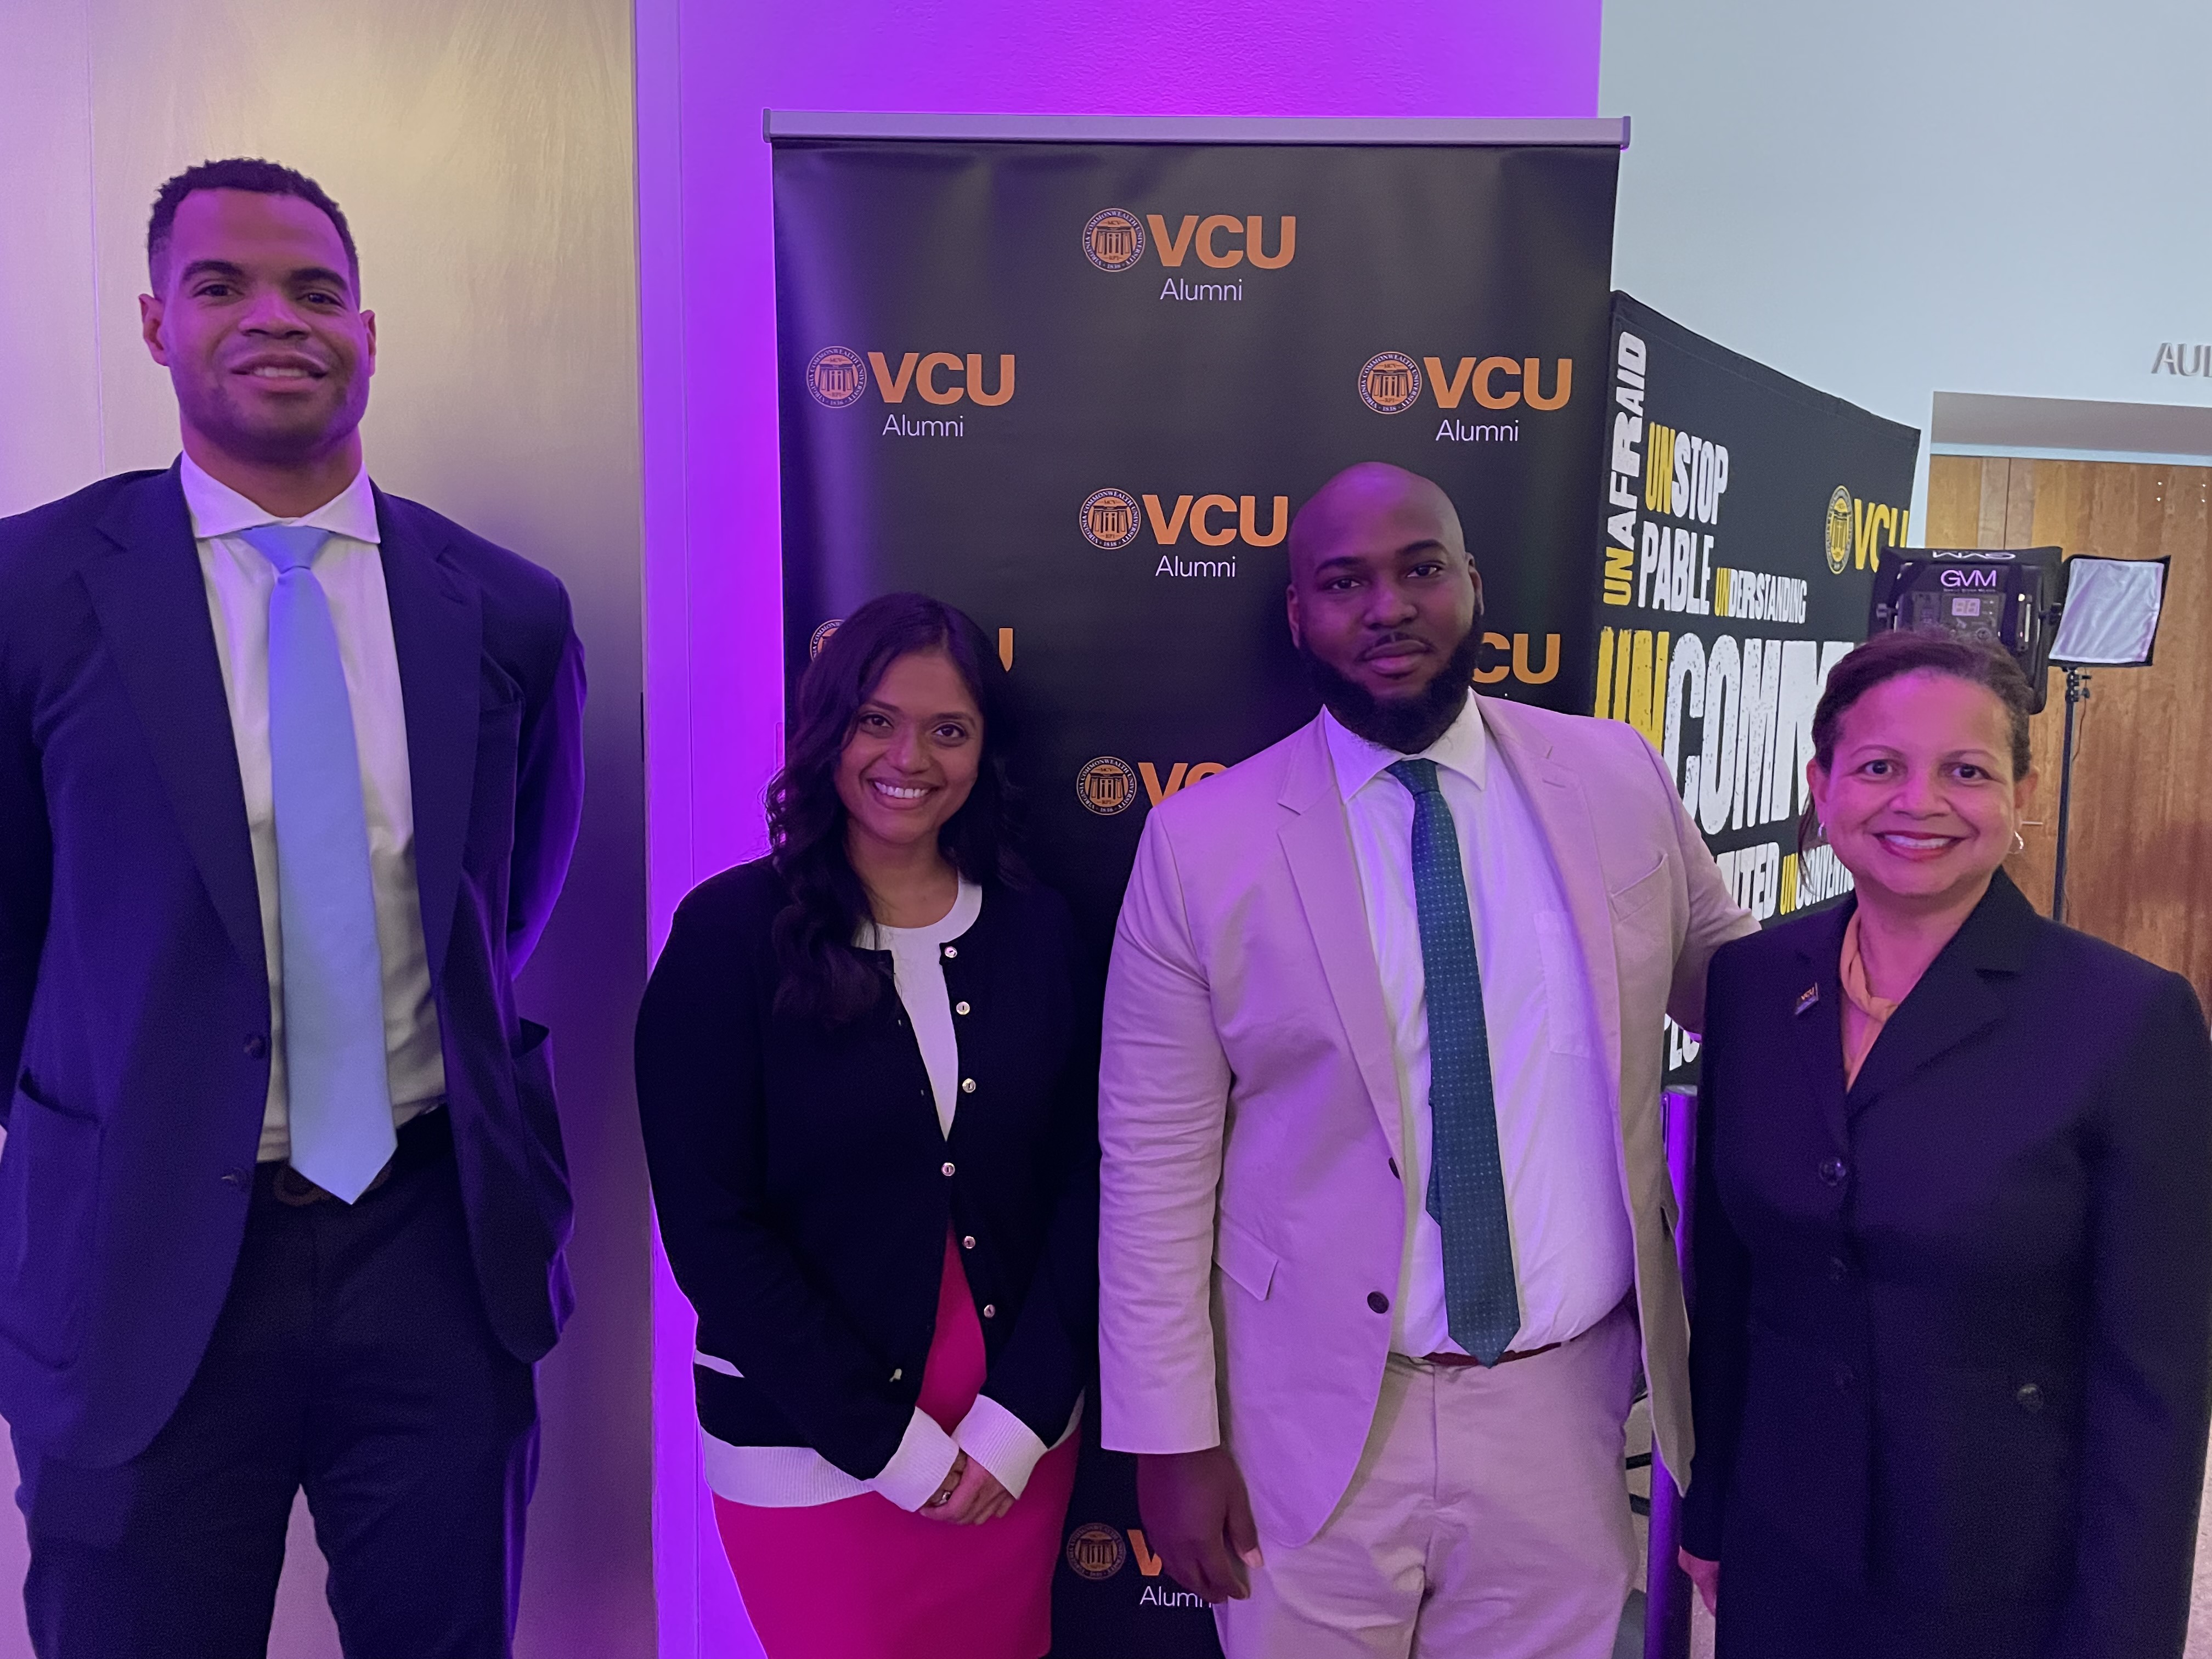 From left to right: Wilder School alumnus David Hinton Jr., a 2021 10 under 10 recipient, poses with Darrion Holloway, Dhara Minesh Amin and Susan Gooden, dean of the Wilder School.